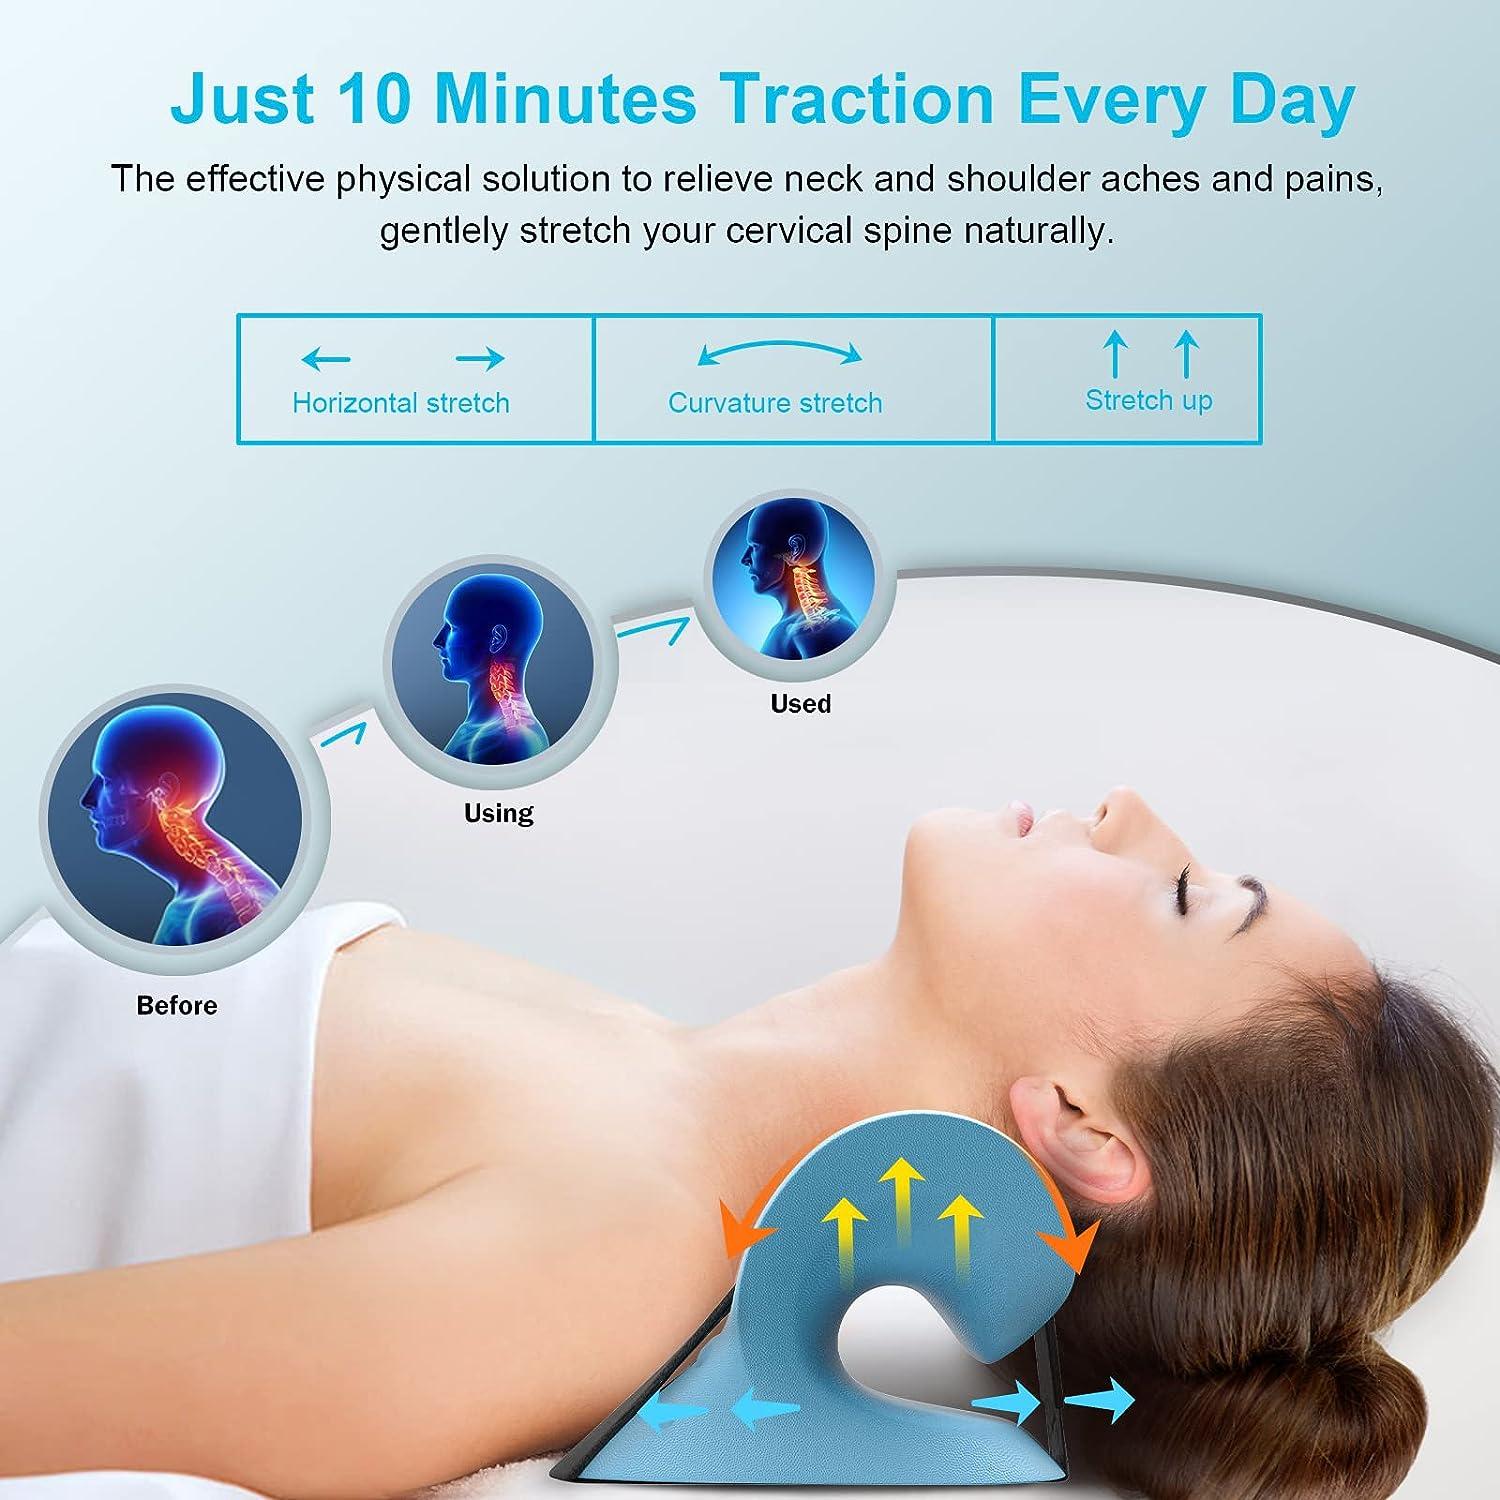 How RestCloud Provides Neck Pain Relief in Just 10 Minutes a Day